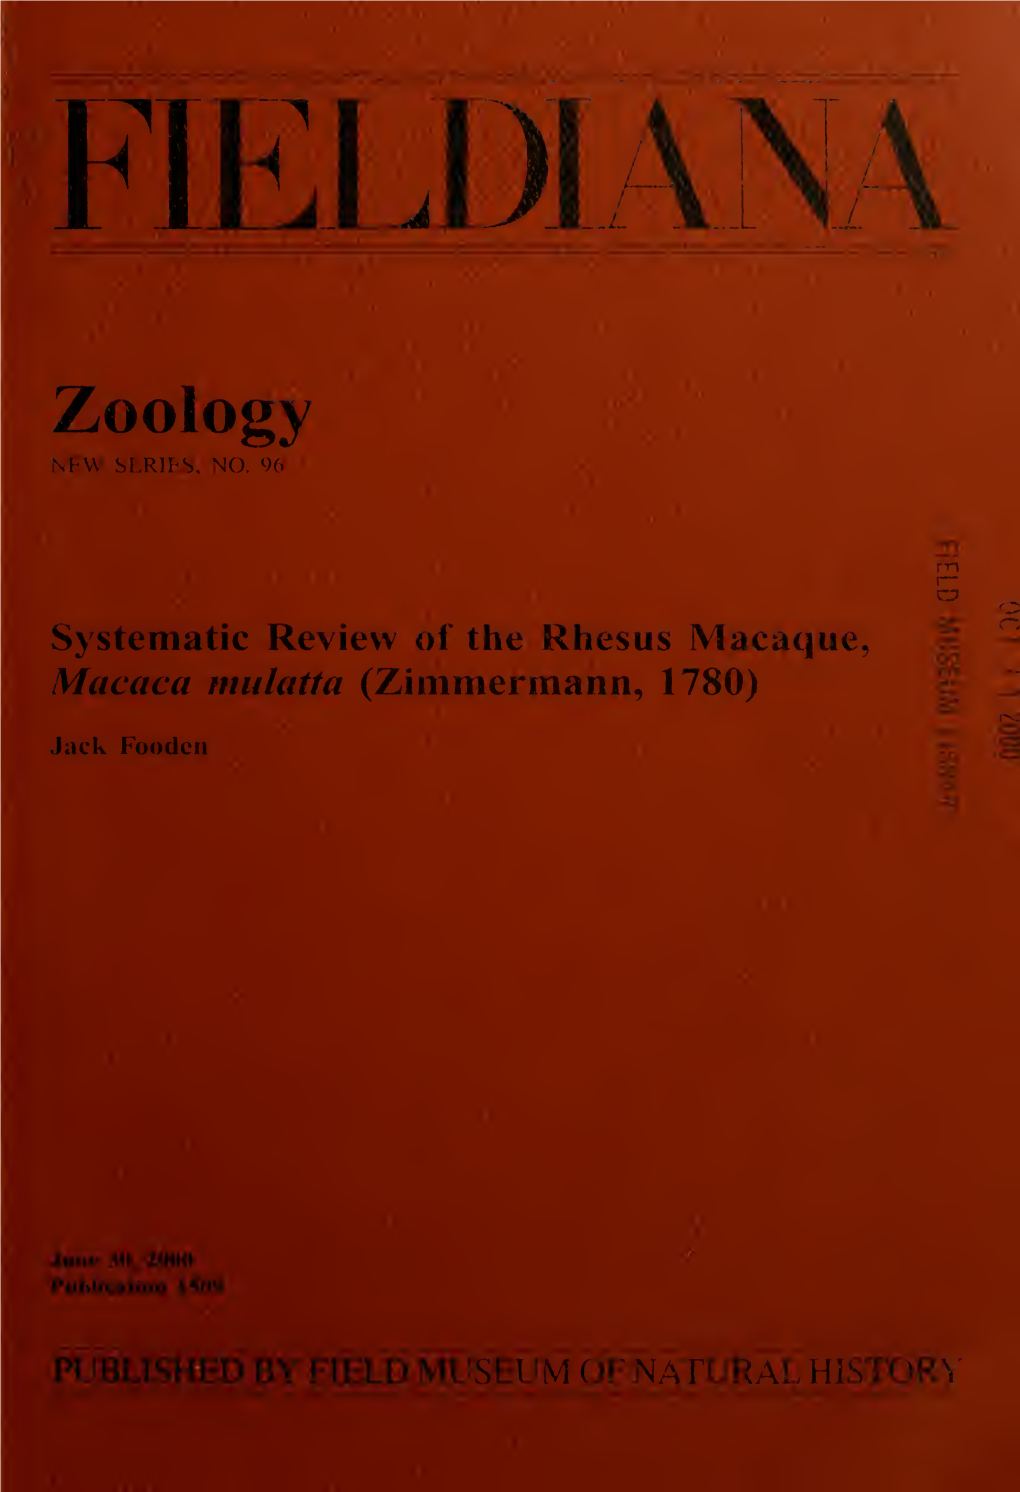 Systematic Review of the Rhesus Macaque, Macaca Mulatta (Zimmermann, 1780)